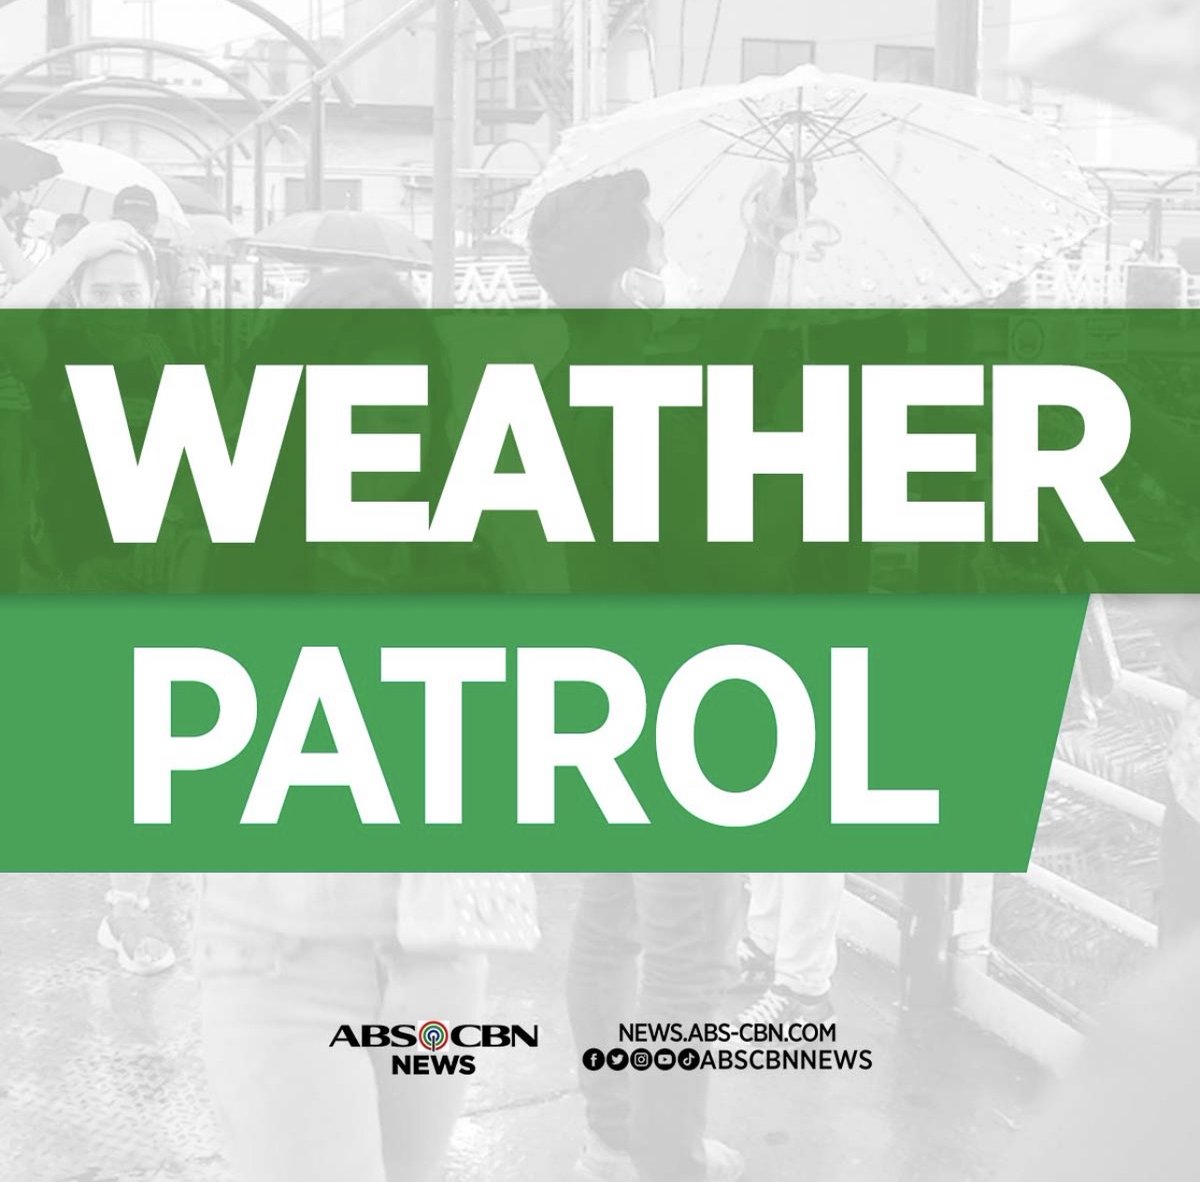 In a thunderstorm advisory issued at 3:27 p.m. this Wednesday, May 1, @dost_pagasa said moderate to heavy rainshowers with lightning and strong winds are expected over Quezon, Pampanga, Tarlac, Rizal and Metro Manila within the next two hours. #WeatherPatrol